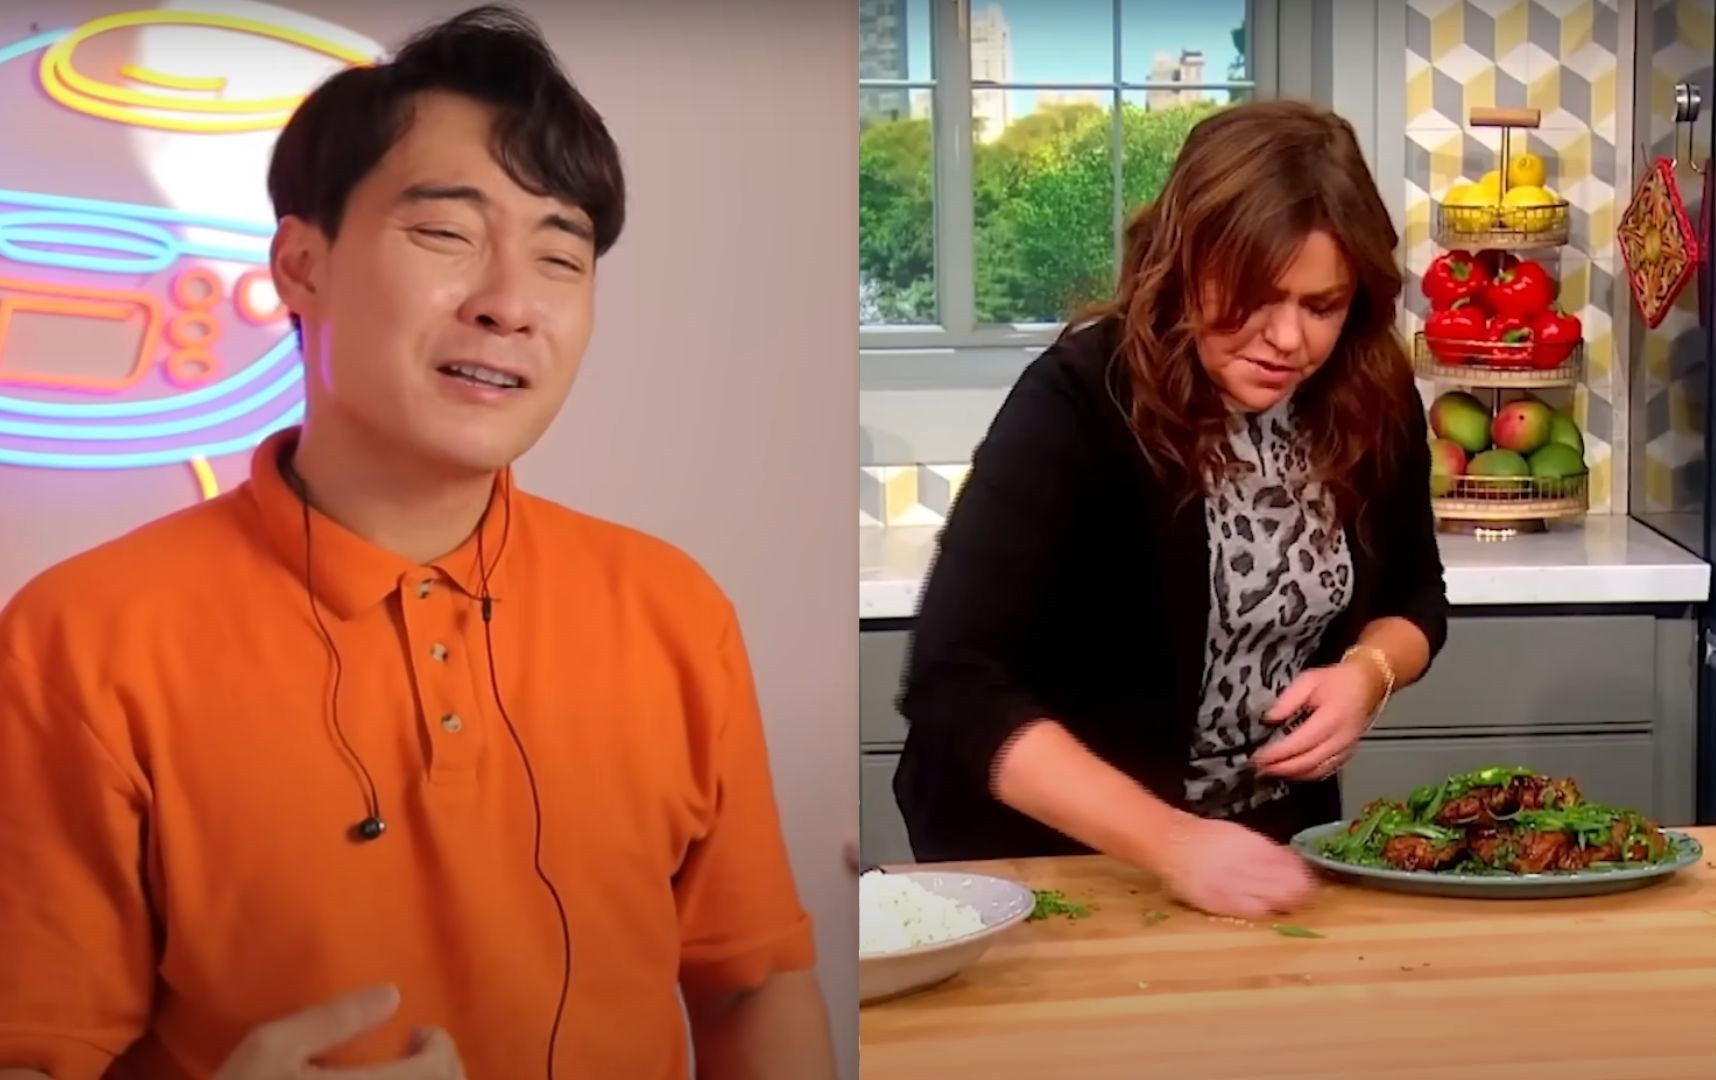 'No olive oil for Asian food!': Nigel Ng's Uncle Roger reacts to Rachael Ray's Adobo recipe